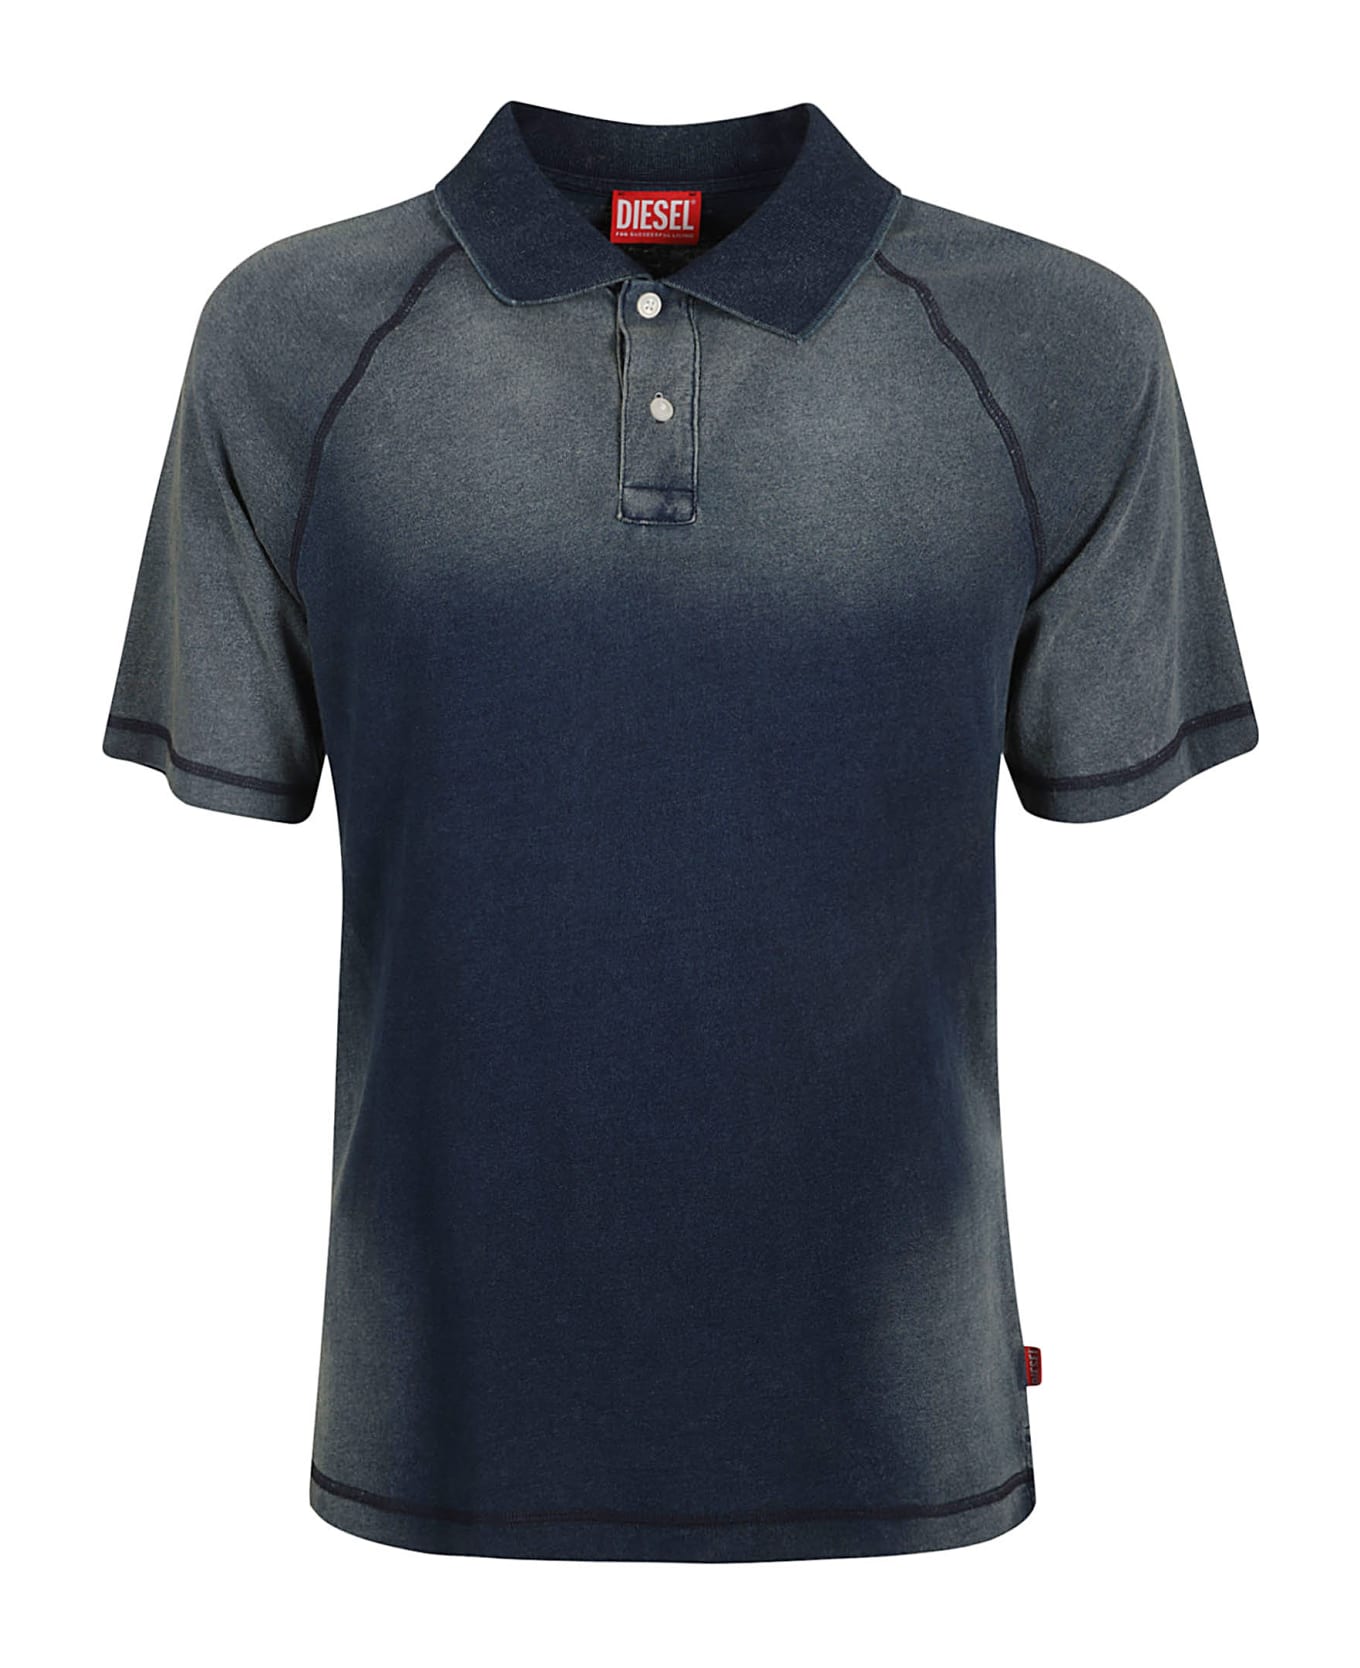 Diesel Classic Fitted Polo Shirt - Non definito